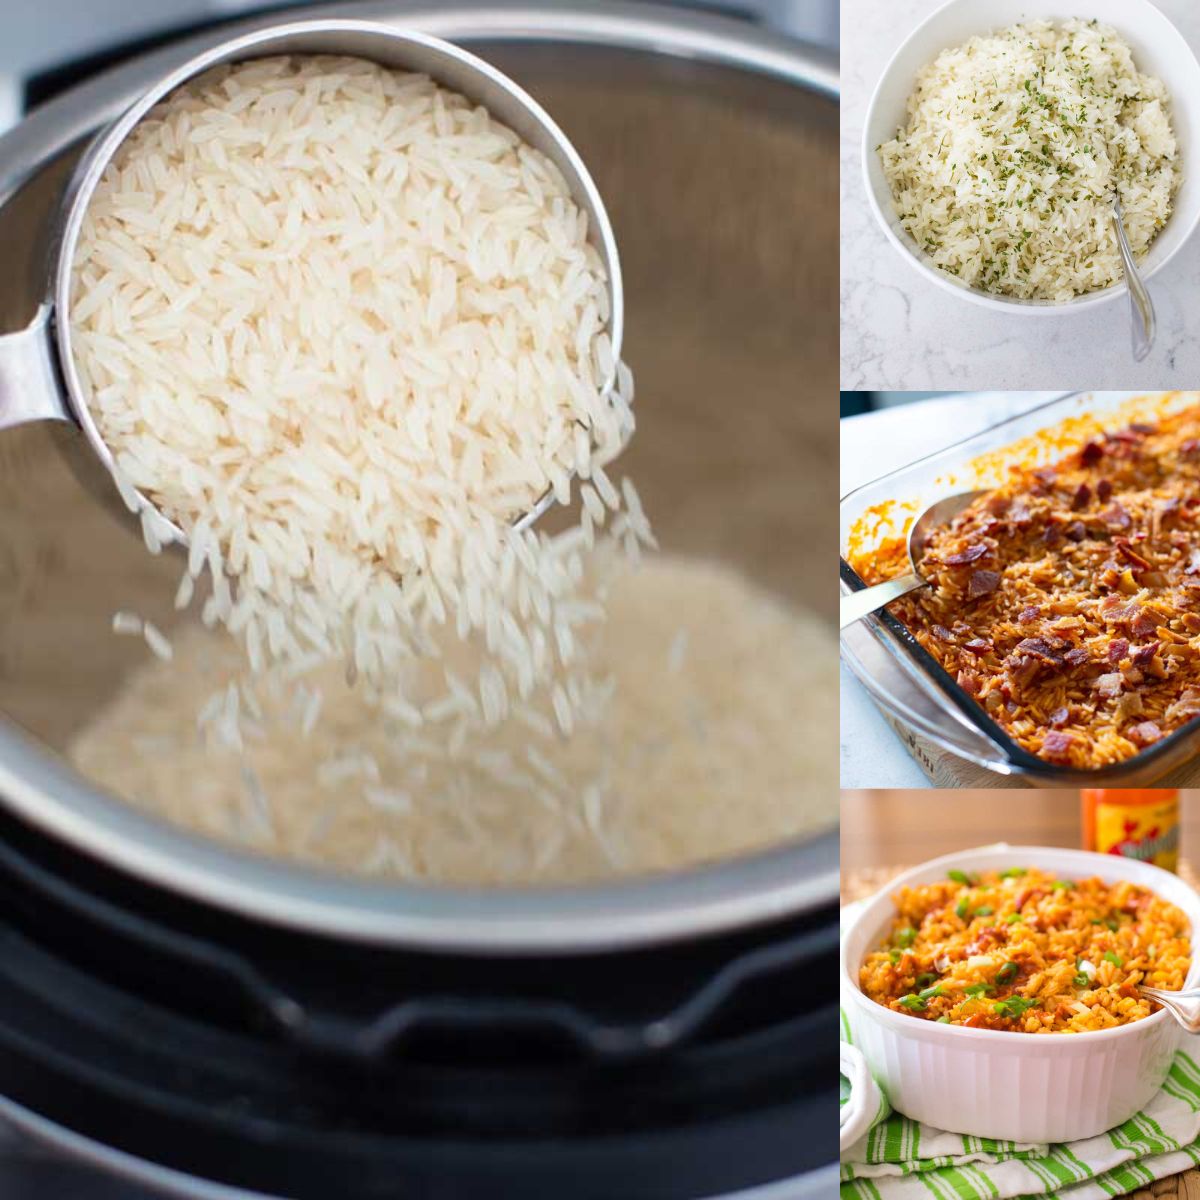 A photo collage shows a scoop of rice being cooked and 3 recipes you could make.